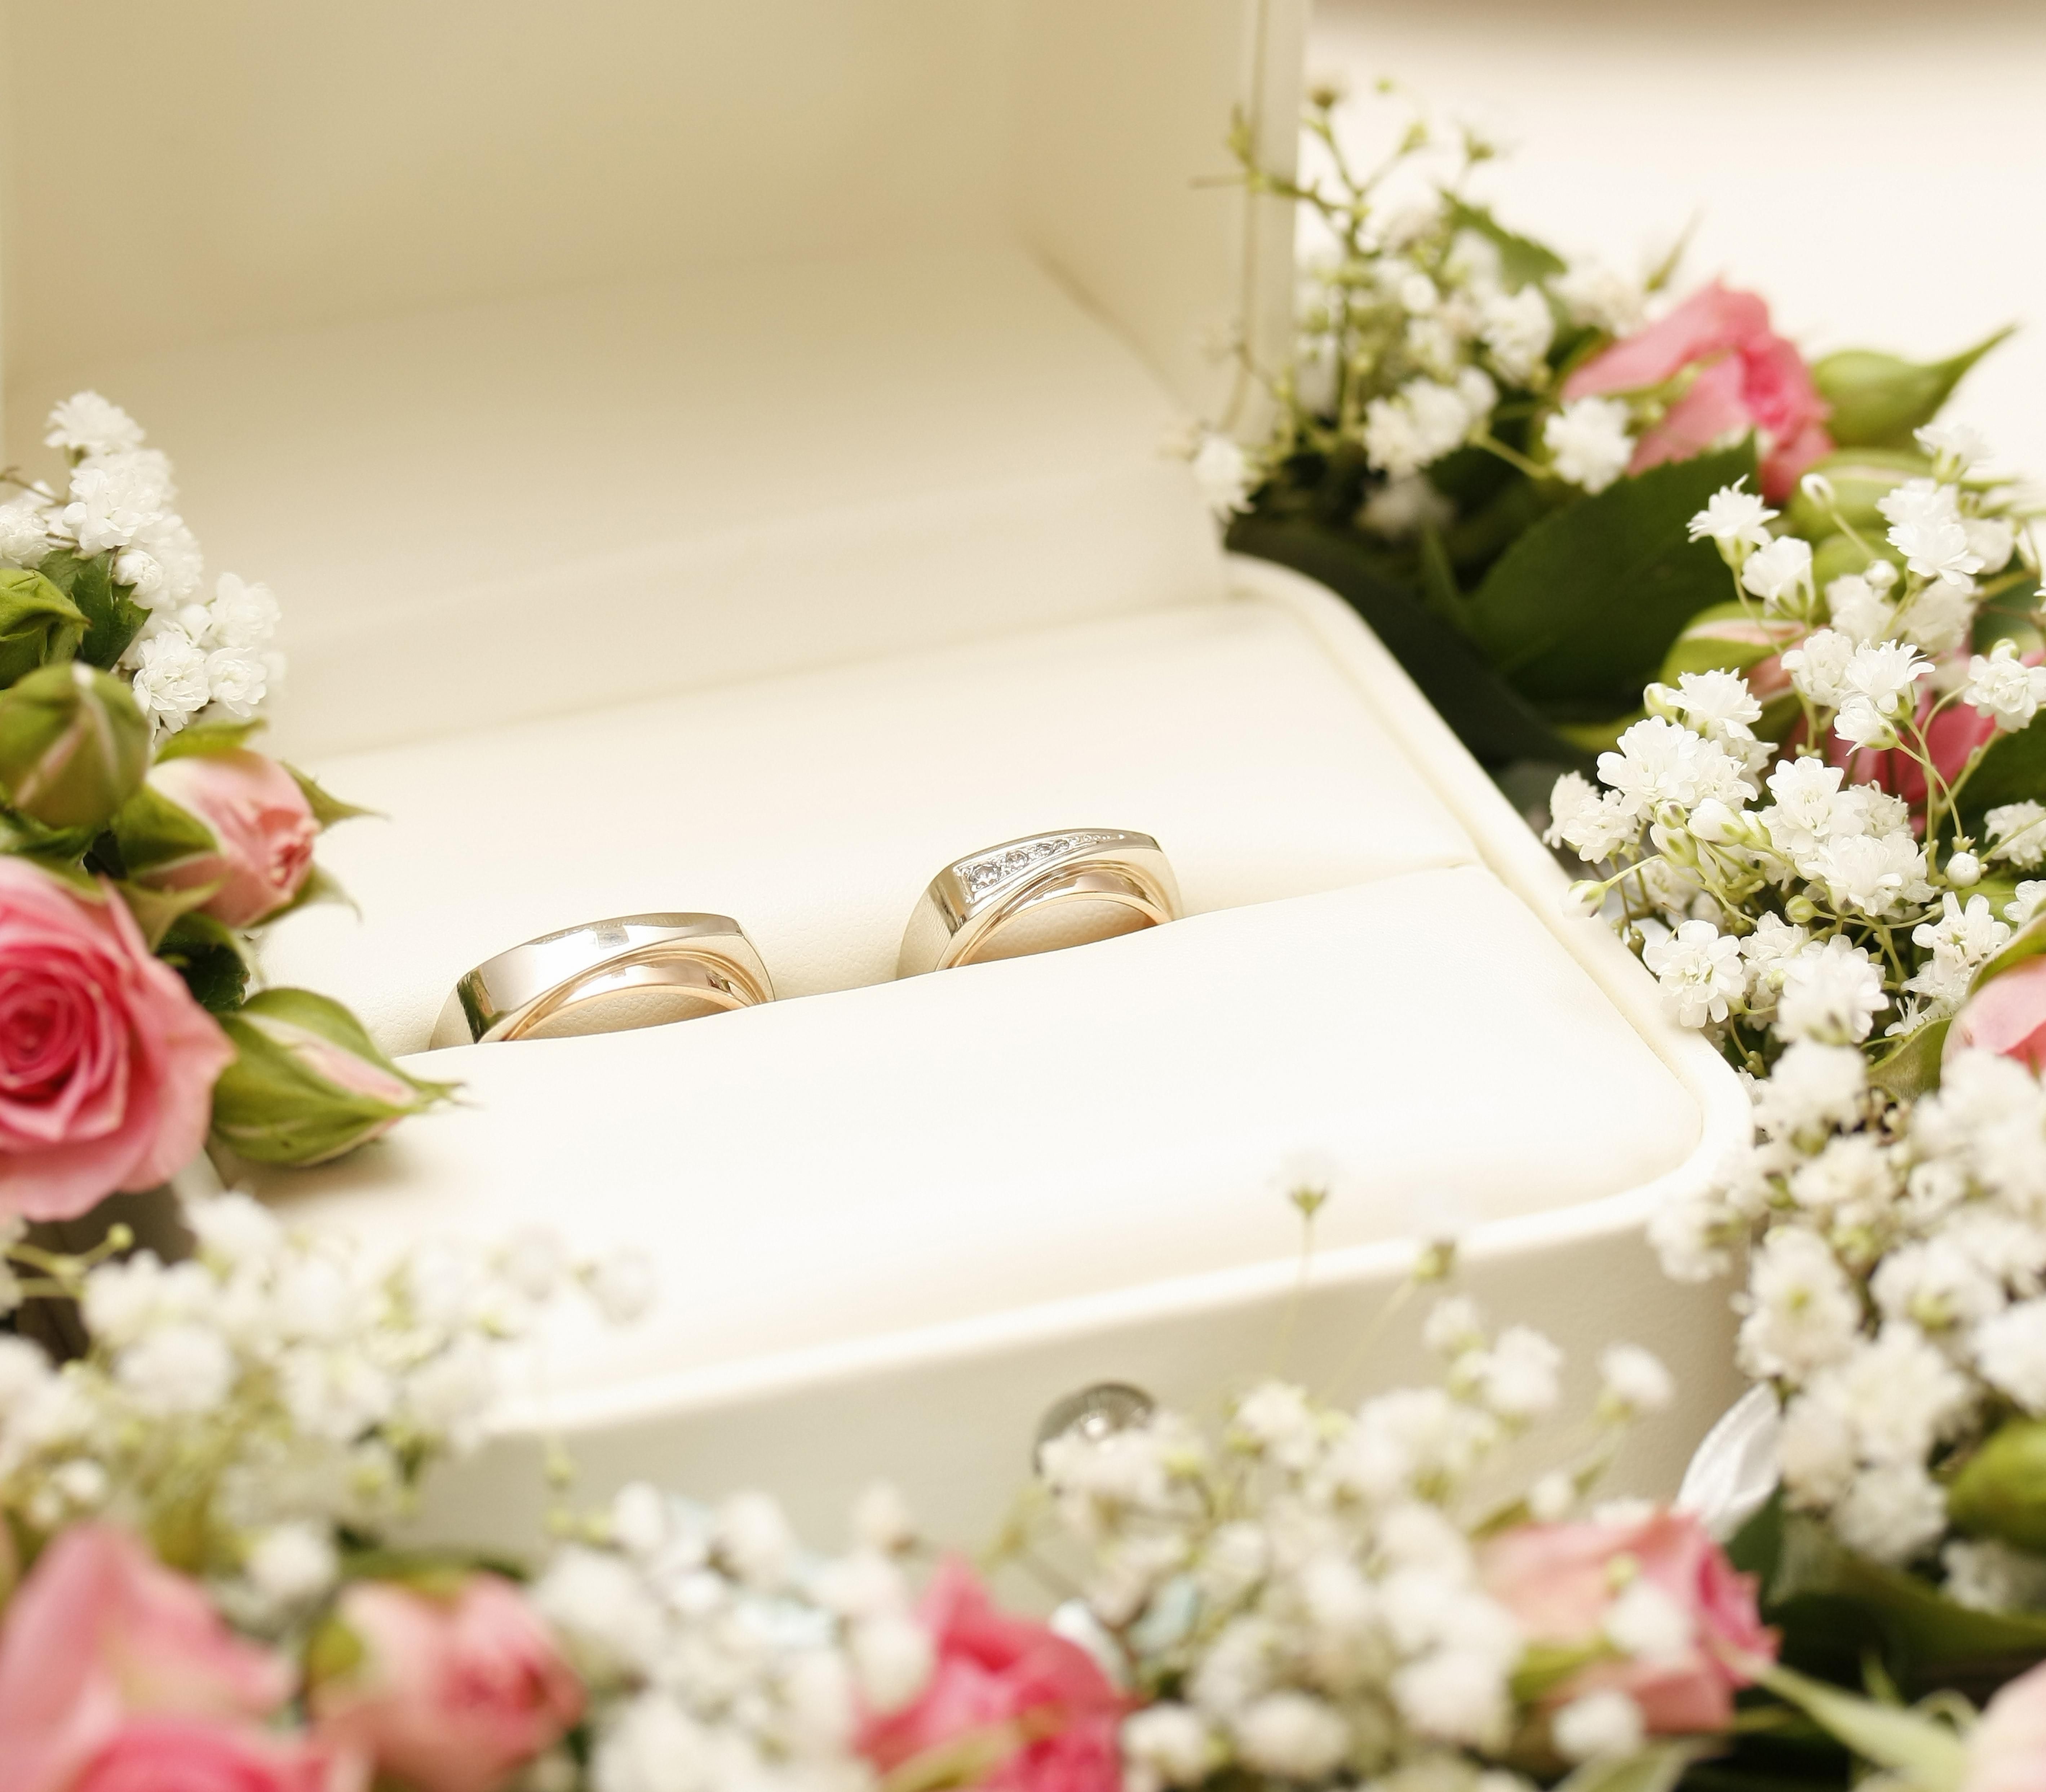 Wedding rings - (#151921) - High Quality and Resolution Wallpapers ...